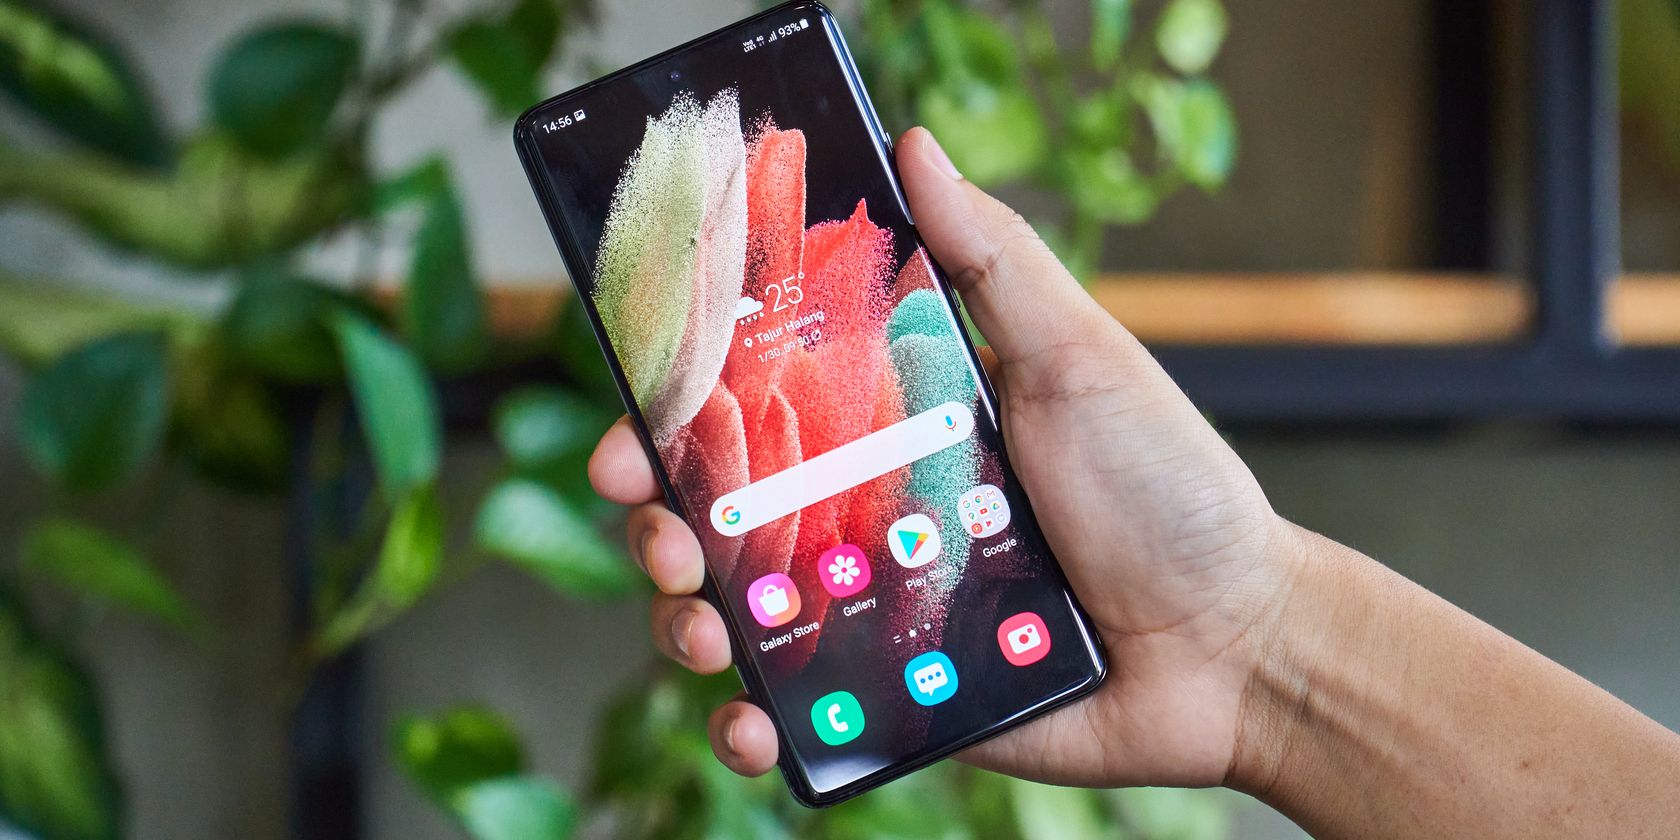 8 Simple Ways to Make Your Samsung Phone Look More Beautiful